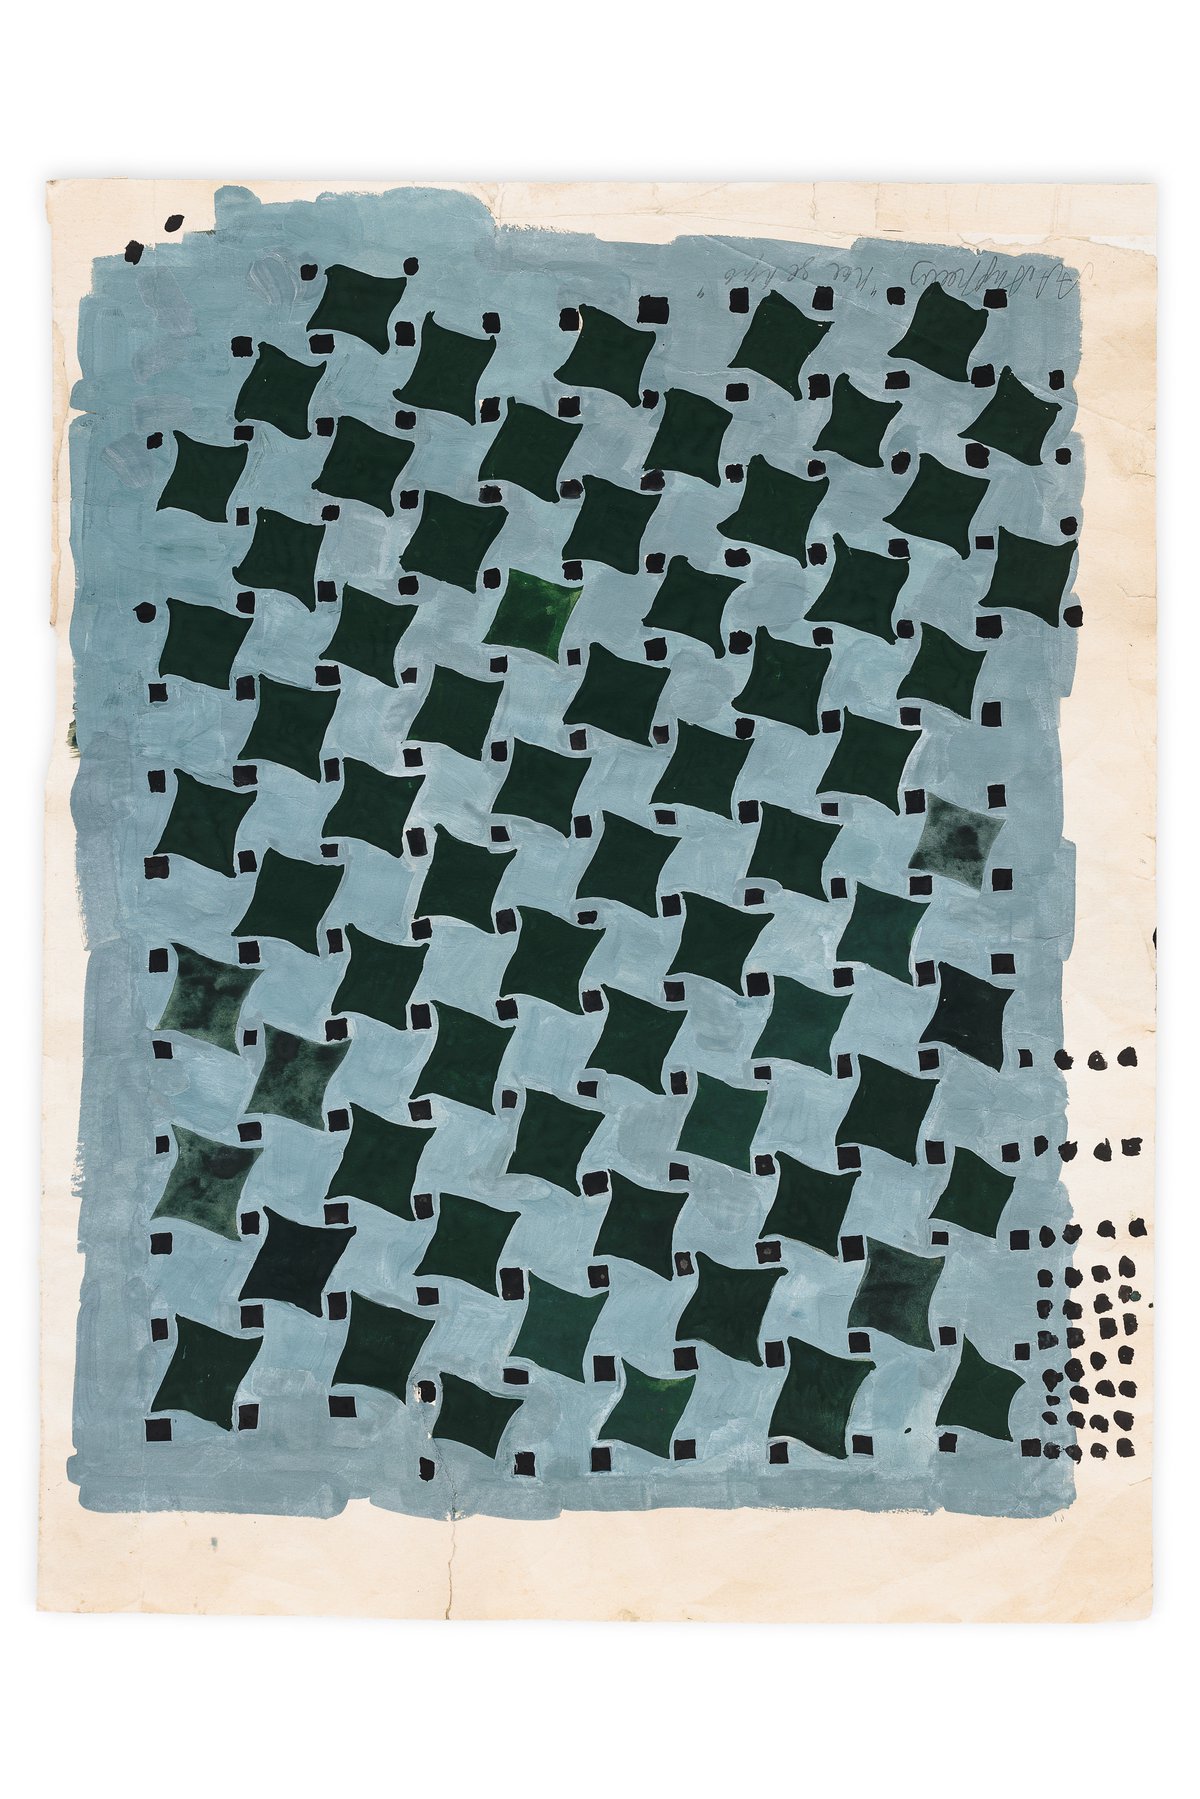 Anna AndreevaThe Grid, 1977 (recto)Gouache on paper59.5 x 46 cm